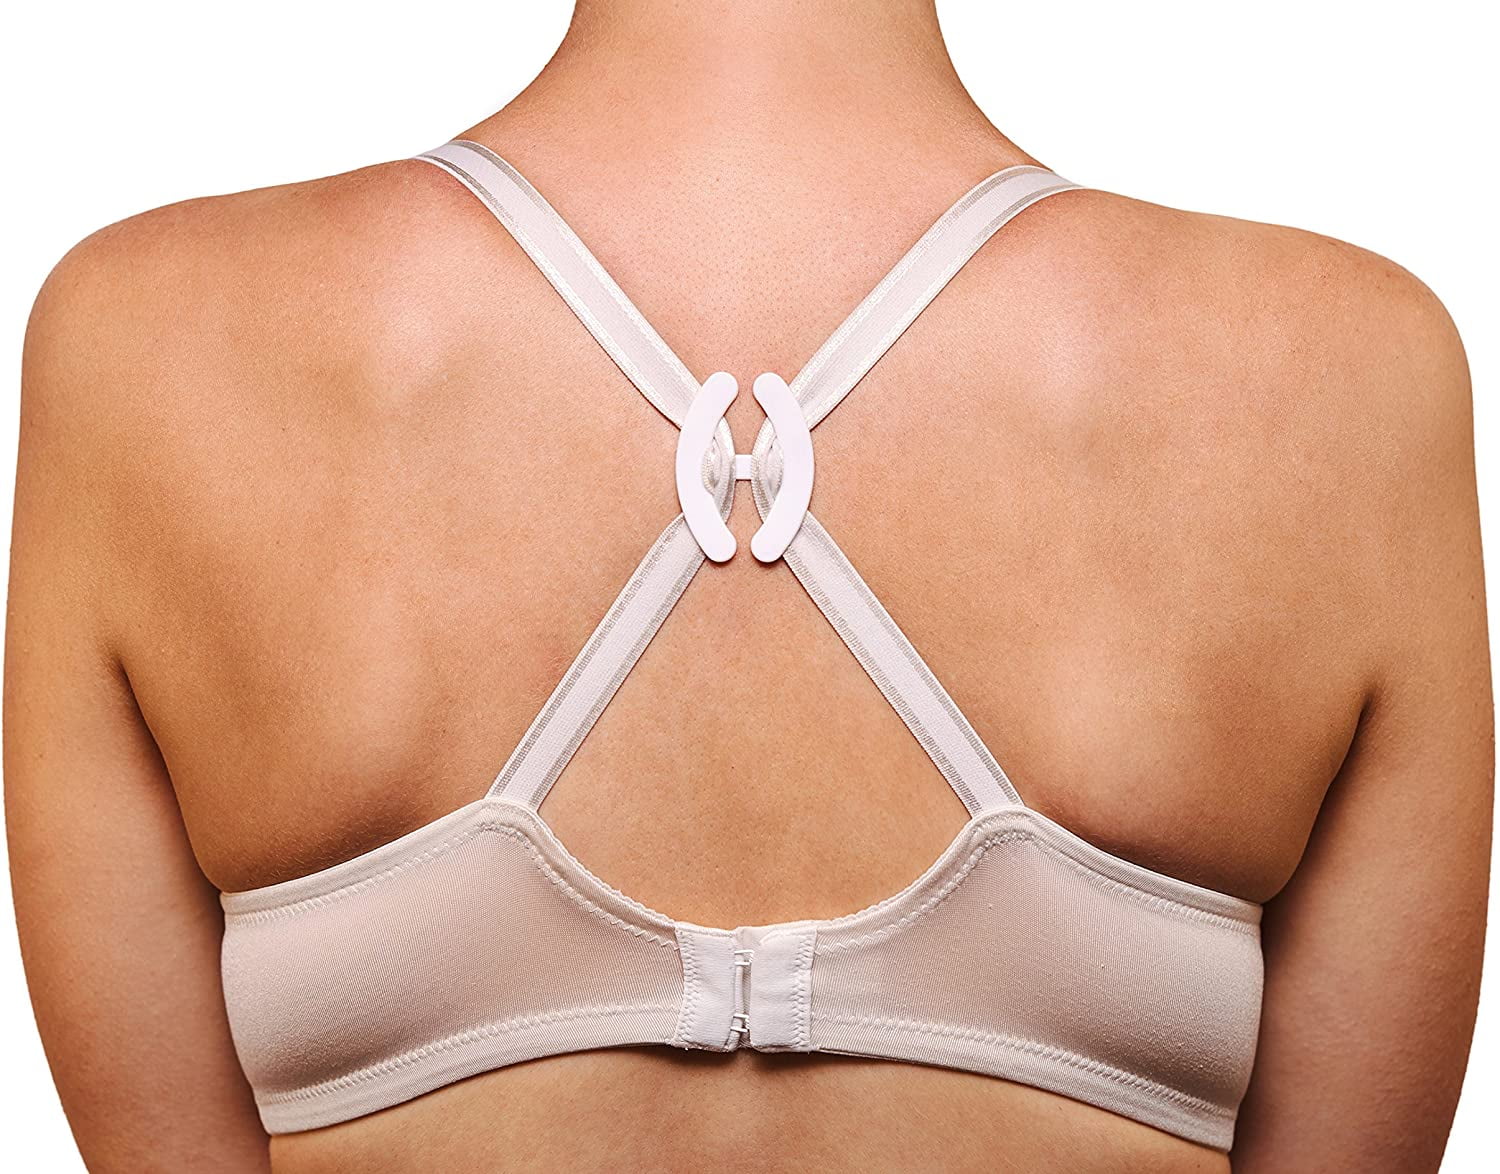 Bra Strap Clips - Racer Back - Conceal Straps - Cleavage Control (Black,  Beige, White, Clear)